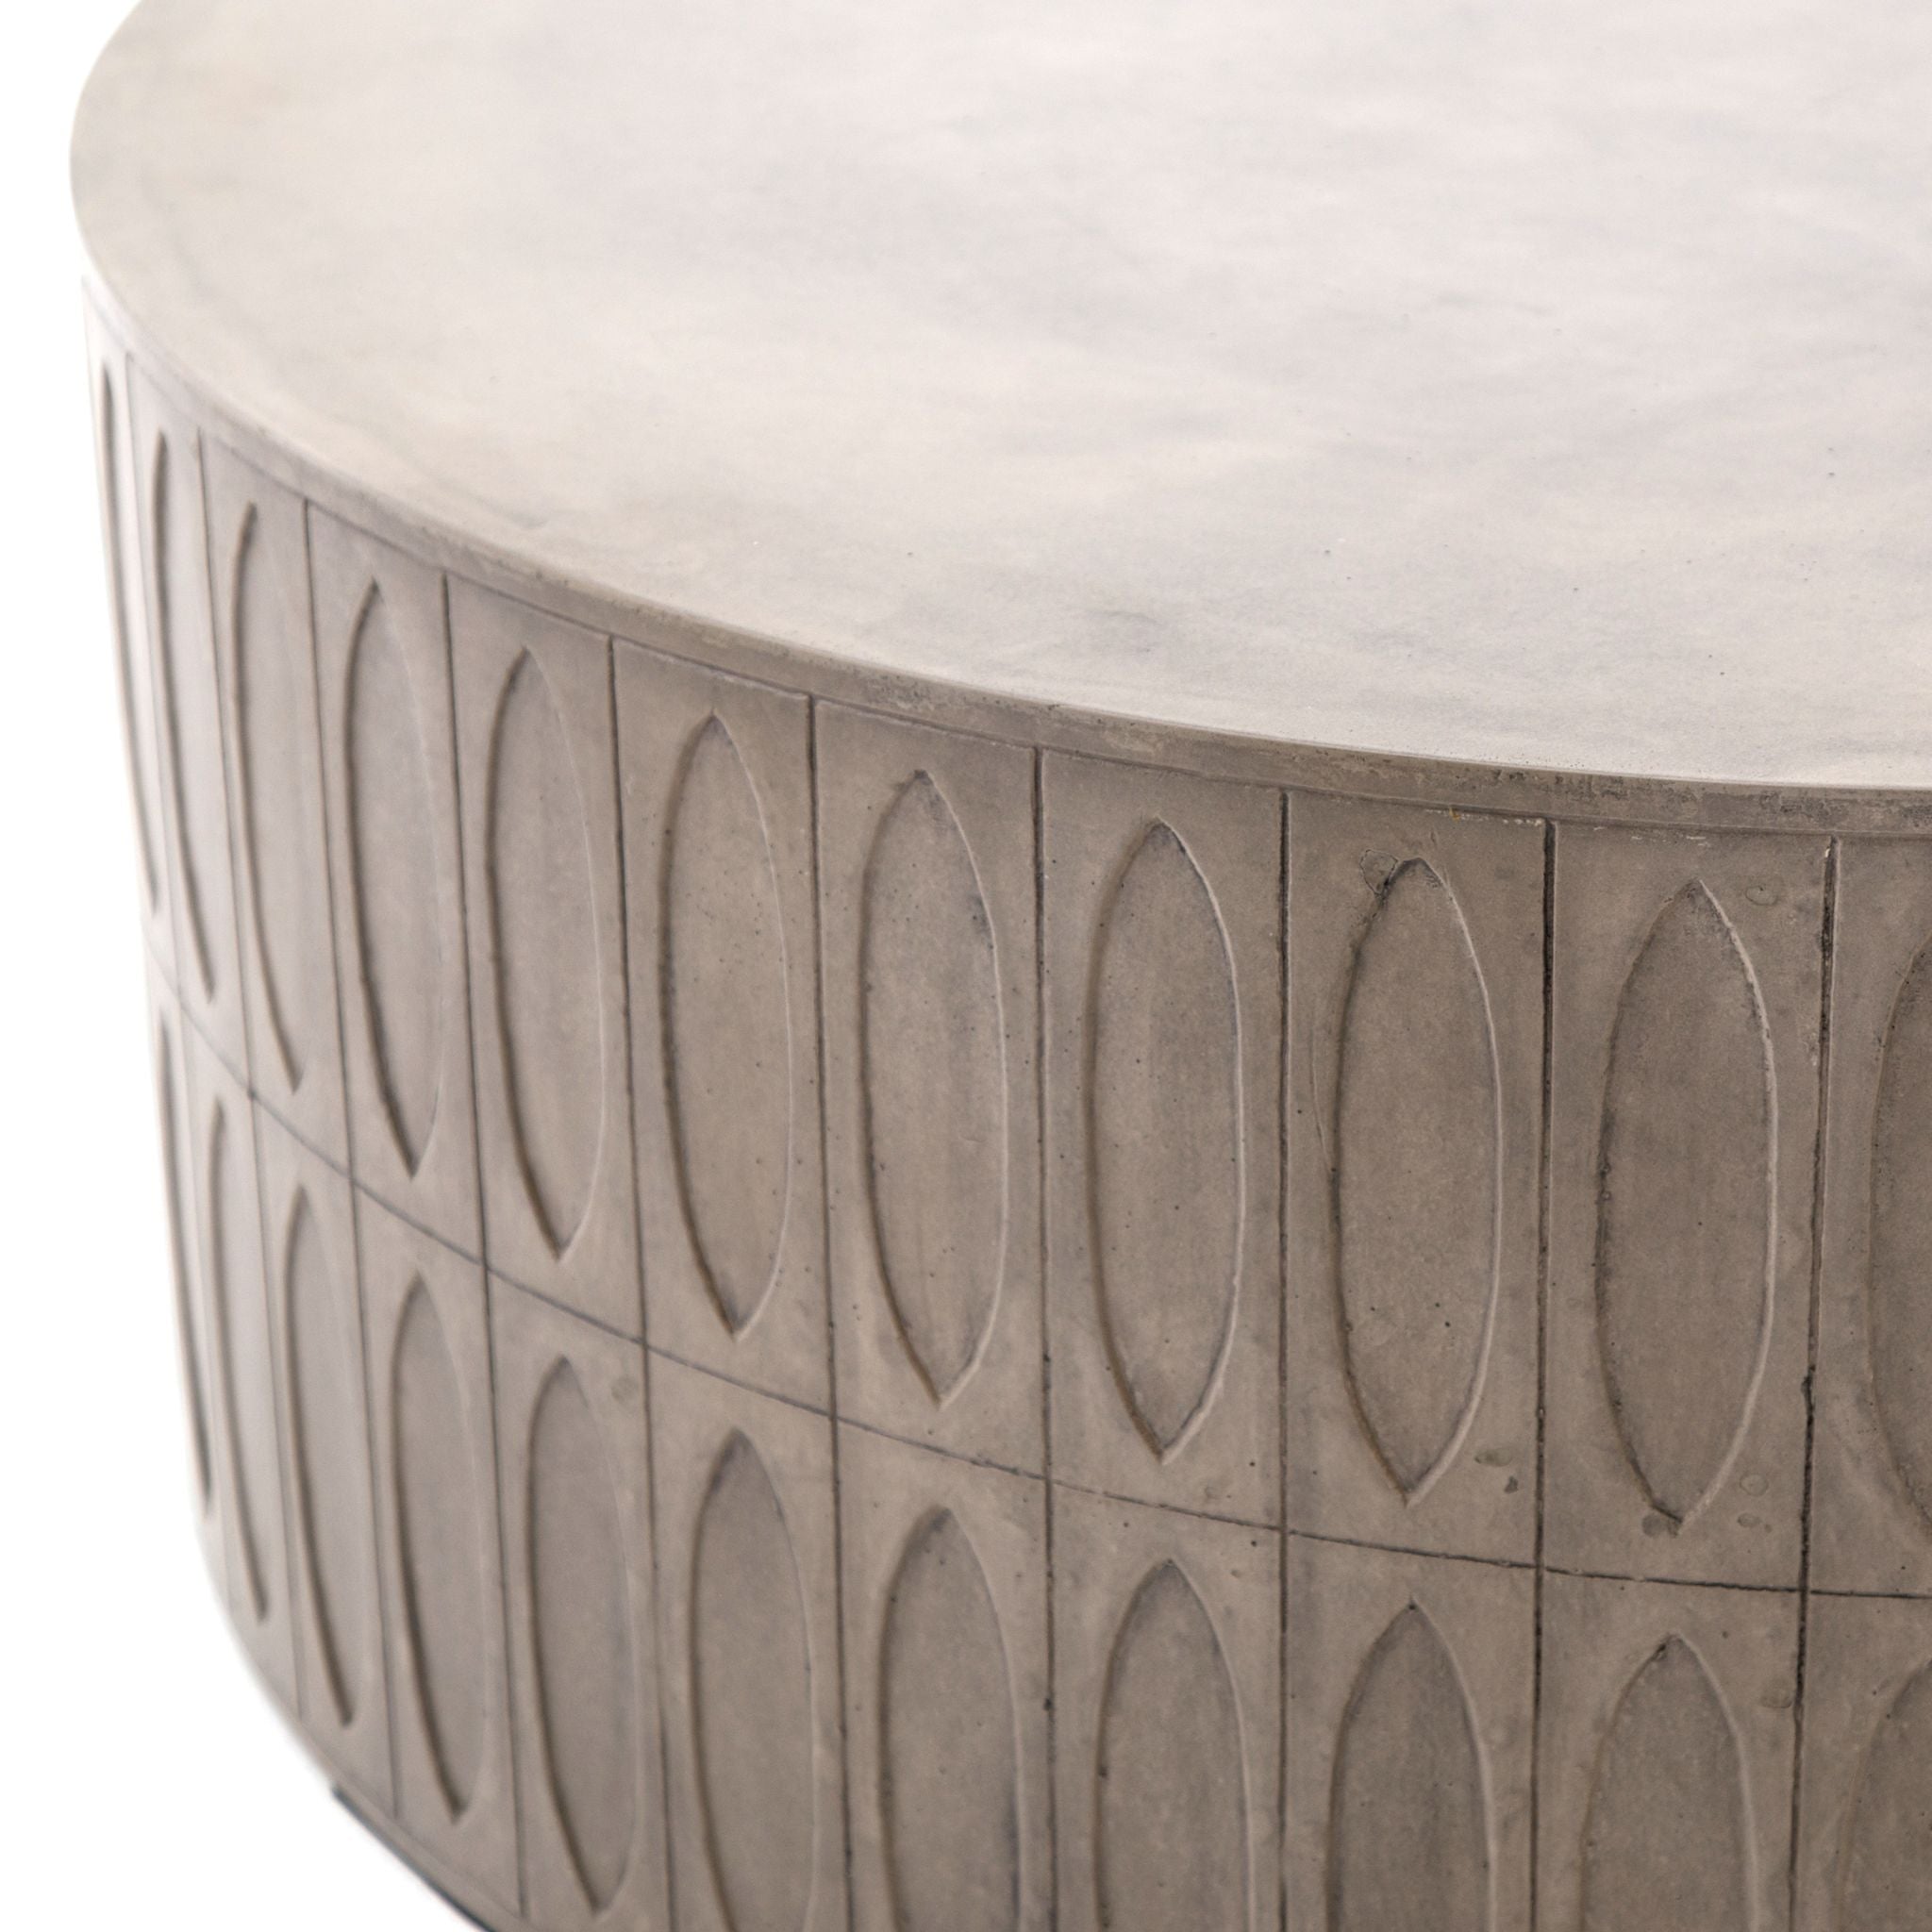 Concrete adopts alluring shapes as modern geometrics play with nature's petal form. A hollowed drum of dark grey concrete is intricately etched for artistic intrigue. Safe indoors or out. Cover or store indoors during inclement weather or when not in use.